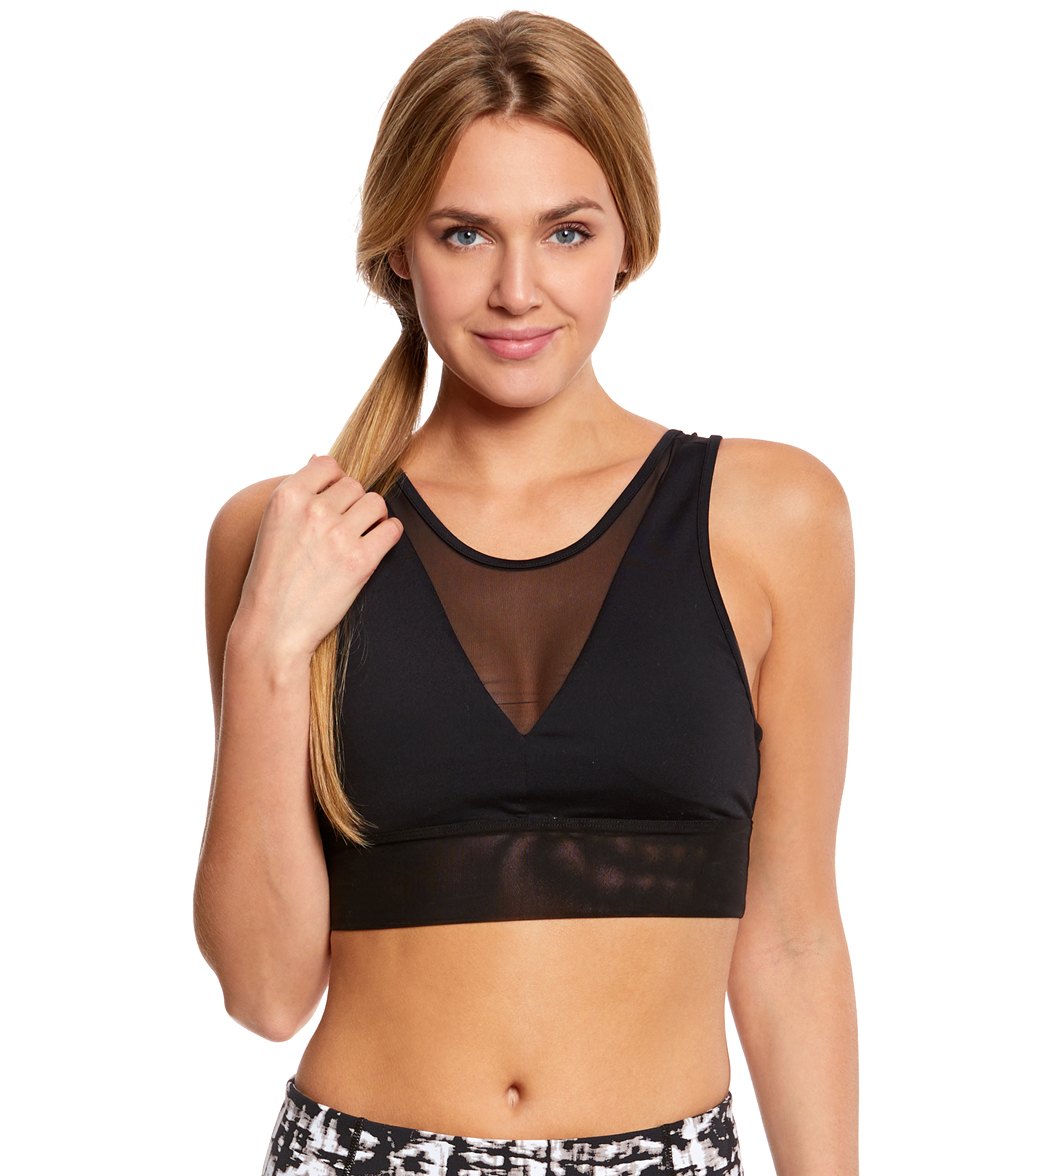 Alo Yoga Jubilee Yoga Sports Bra at YogaOutlet.com - Free Shipping